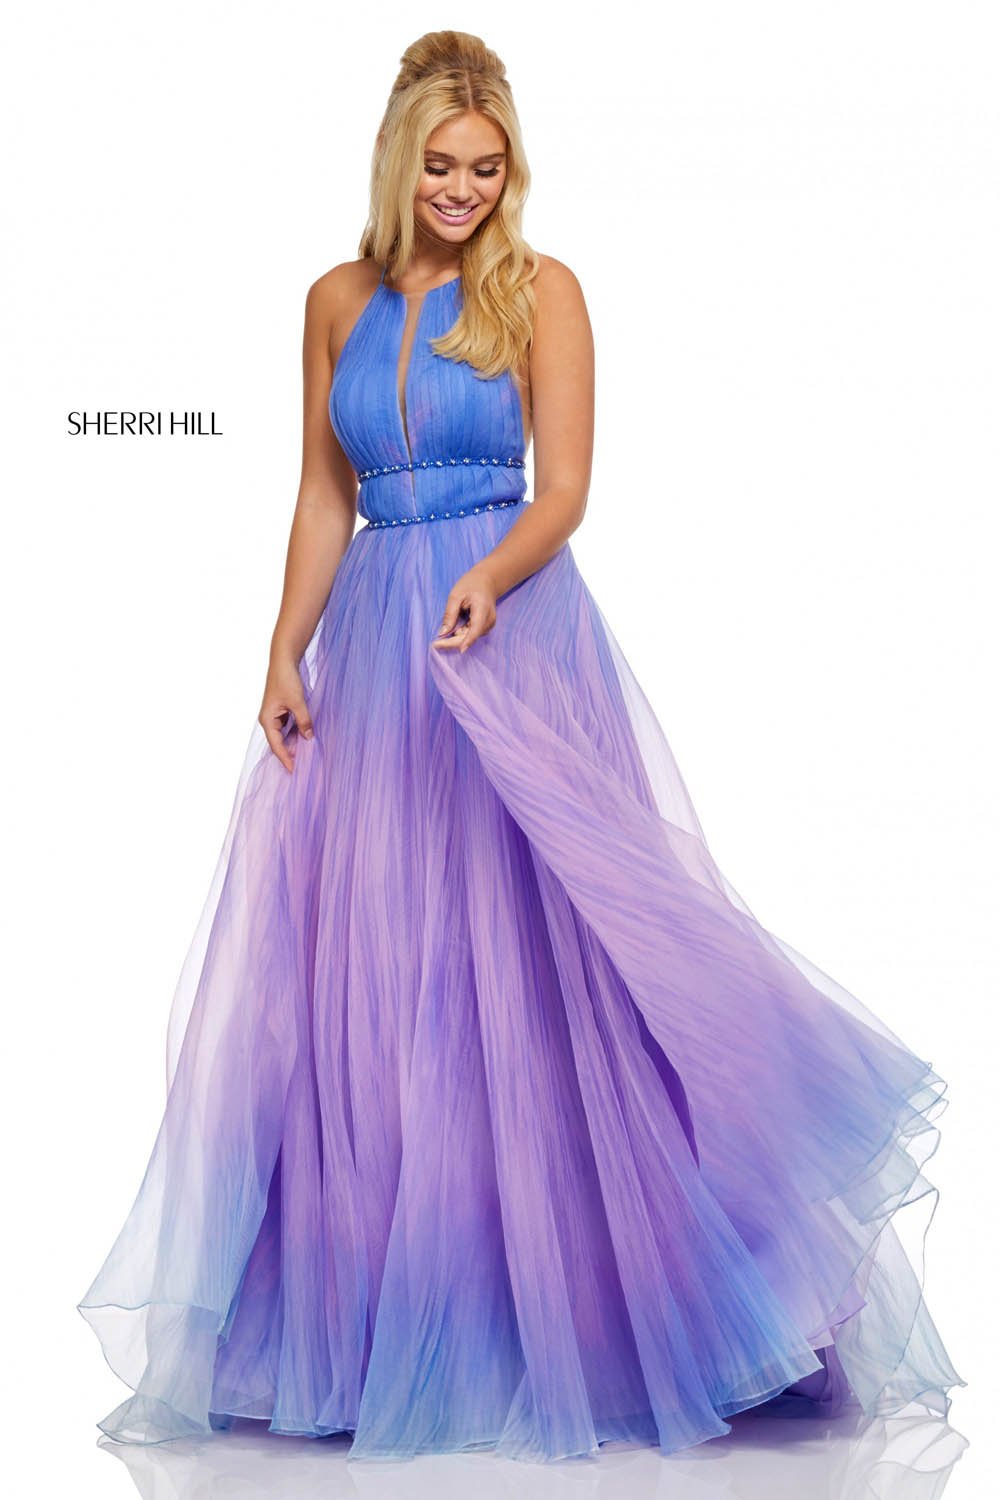 Sherri Hill 52704 dress images in these colors: Blue Purple.